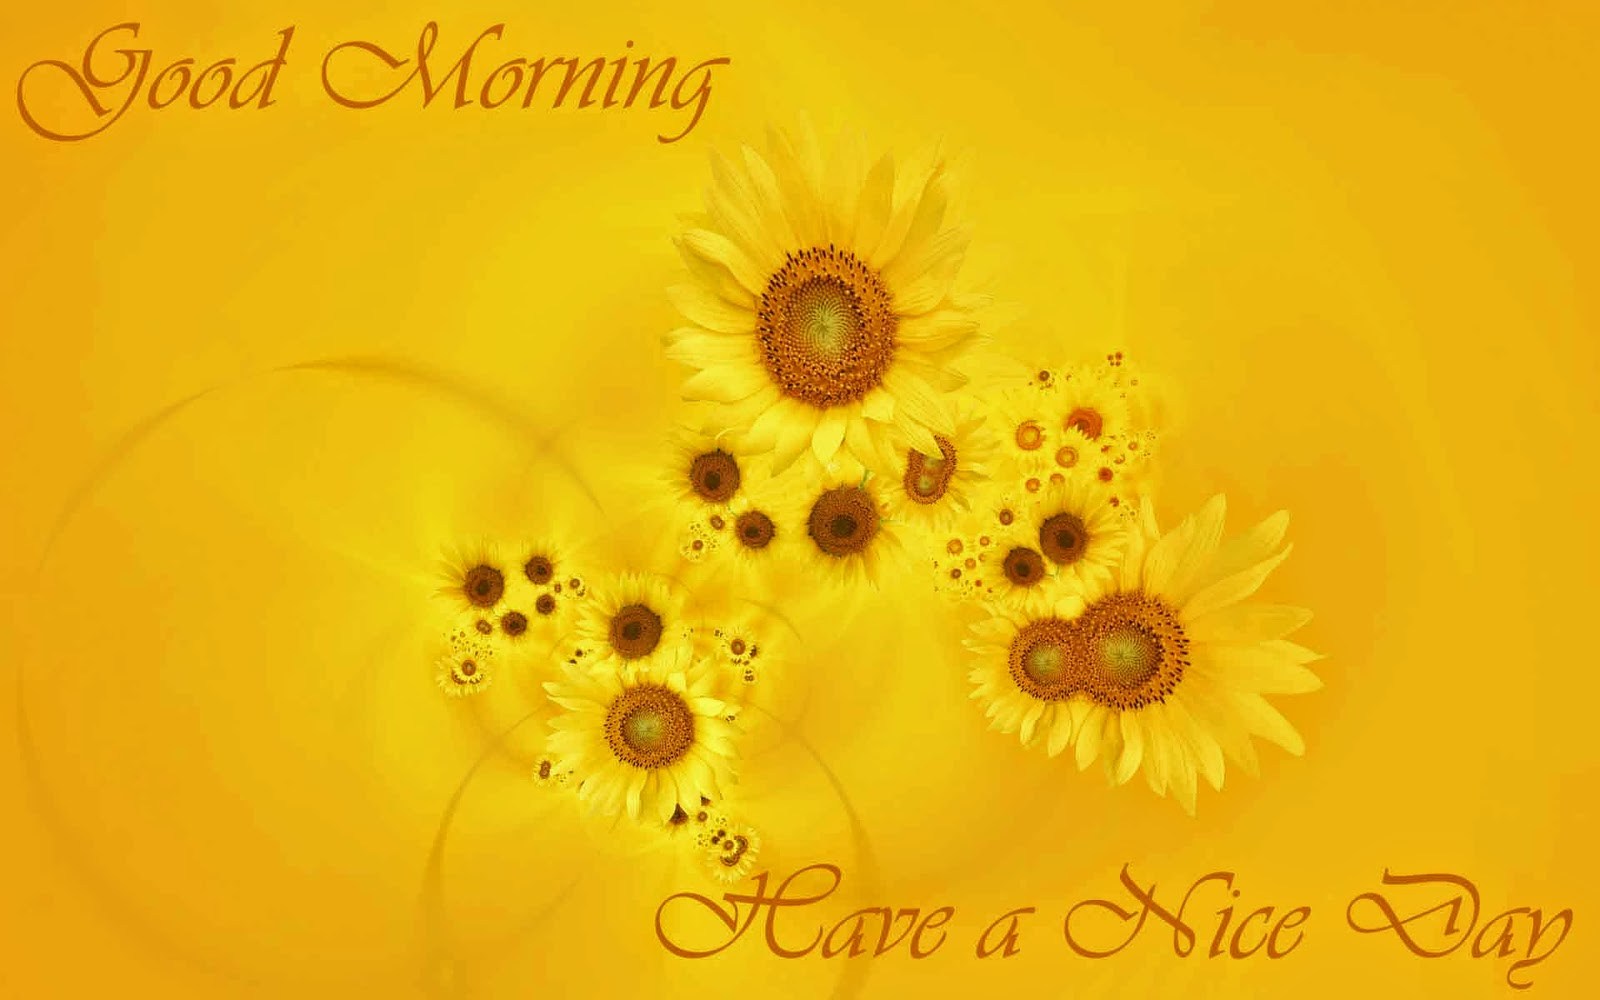 Image Friends Pics Quote Wish Good Morning Hd Wallpapers - Have A Good Day Yellow , HD Wallpaper & Backgrounds